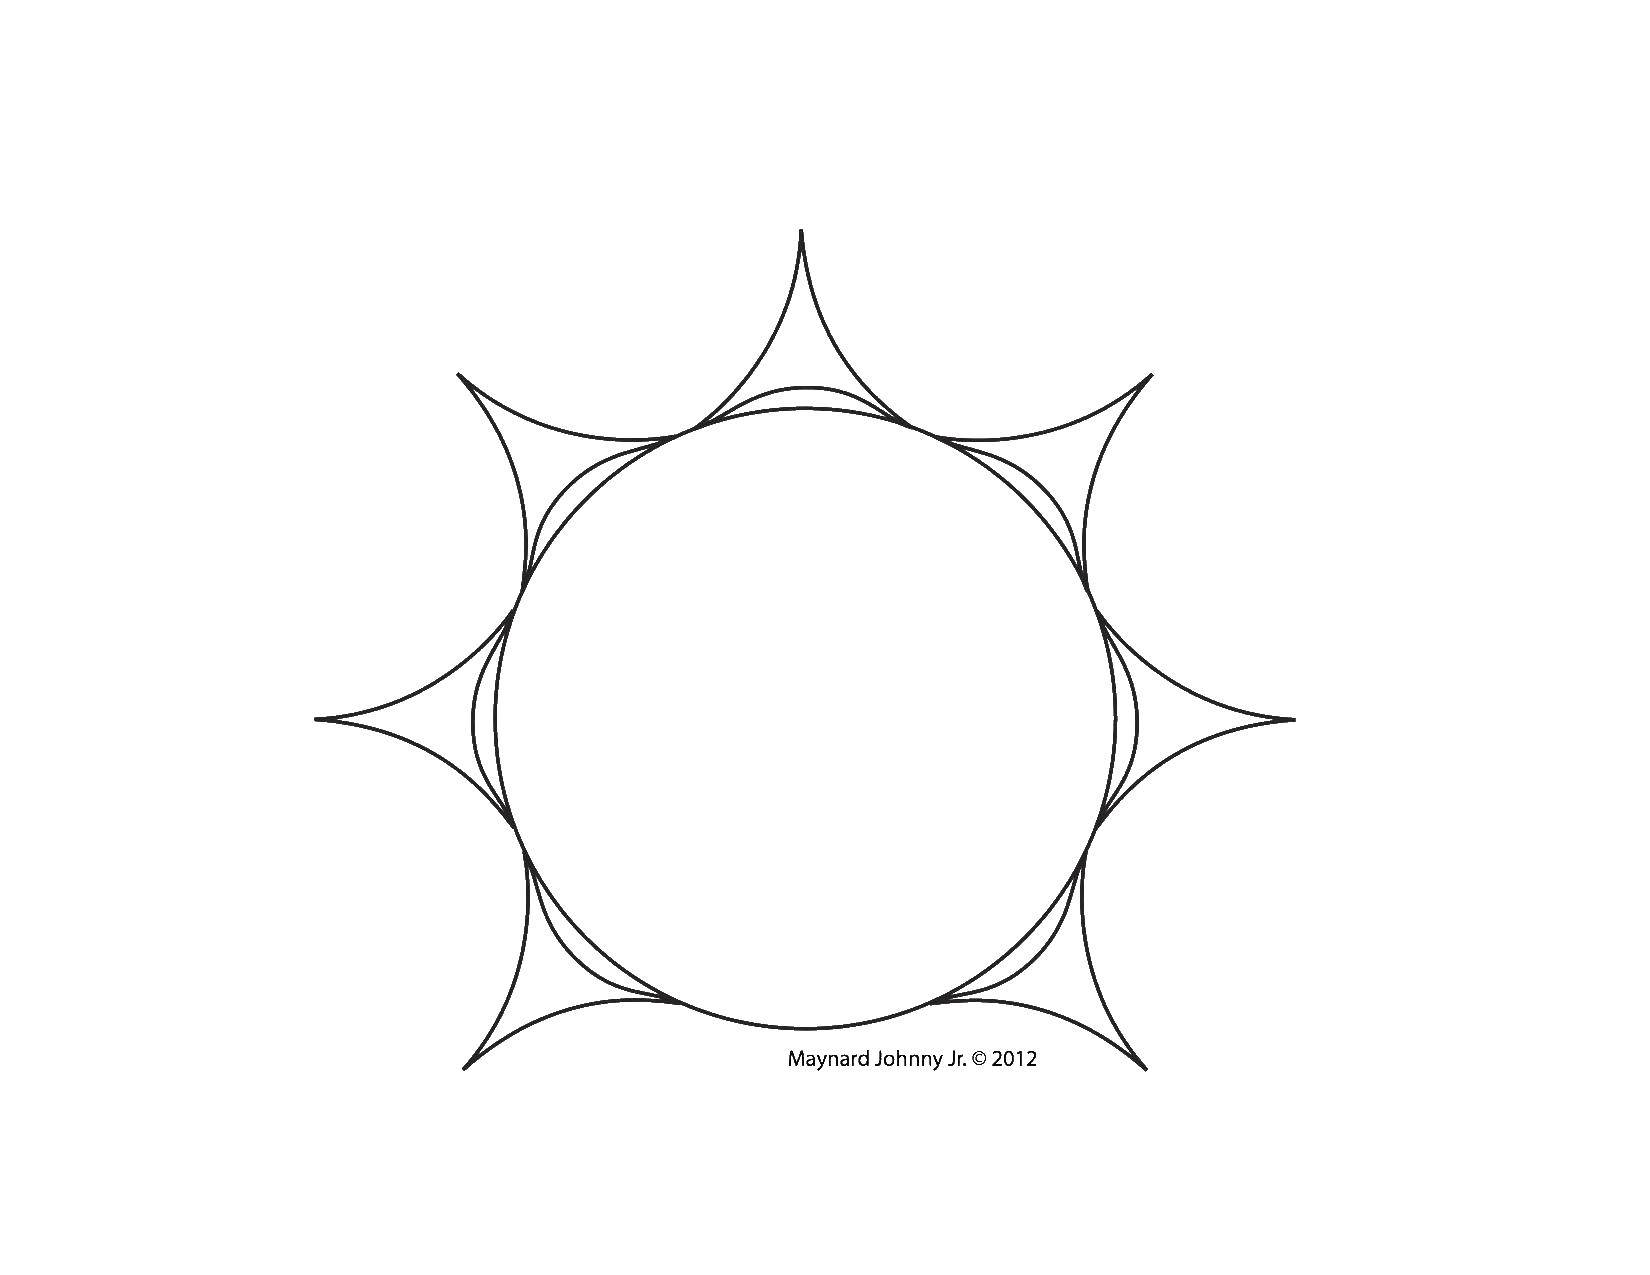 Coloring The outline of the sun. Category The contour of the sun. Tags:  contour, sun, rays, round.